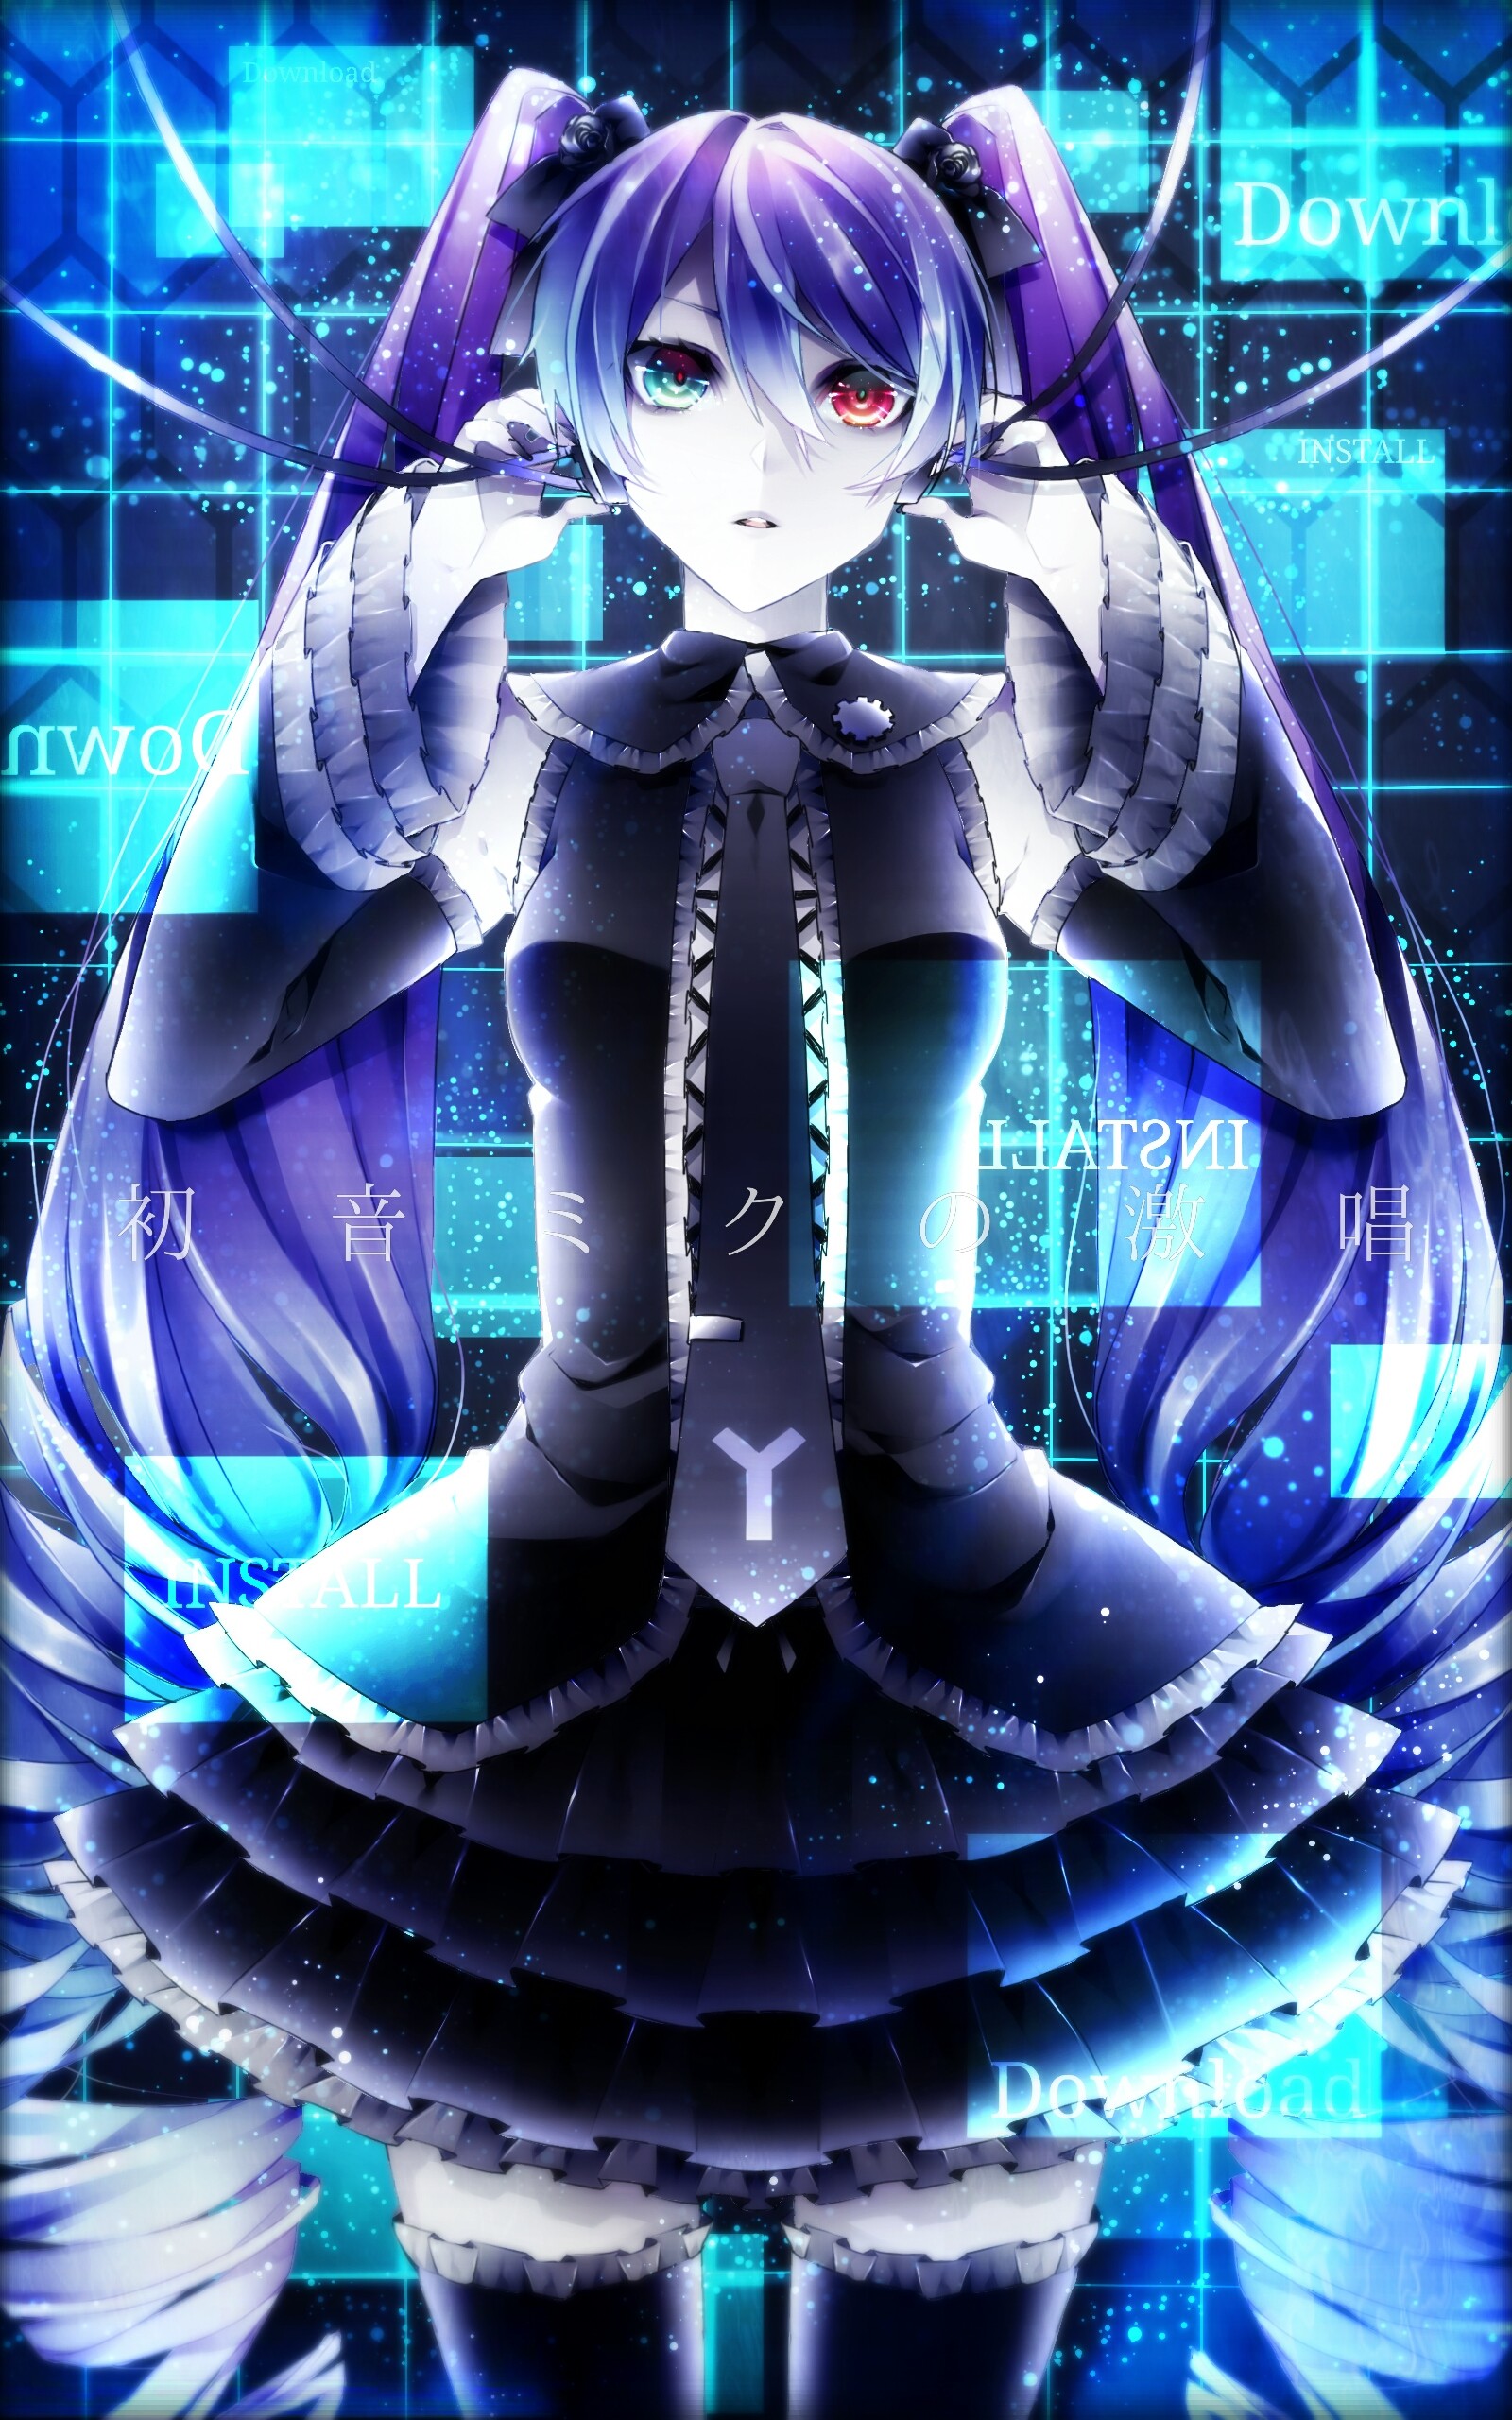 1600x2560 Tags: Anime, 1055 (Artist), Project DIVA 2nd, VOCALOID, Hatsune